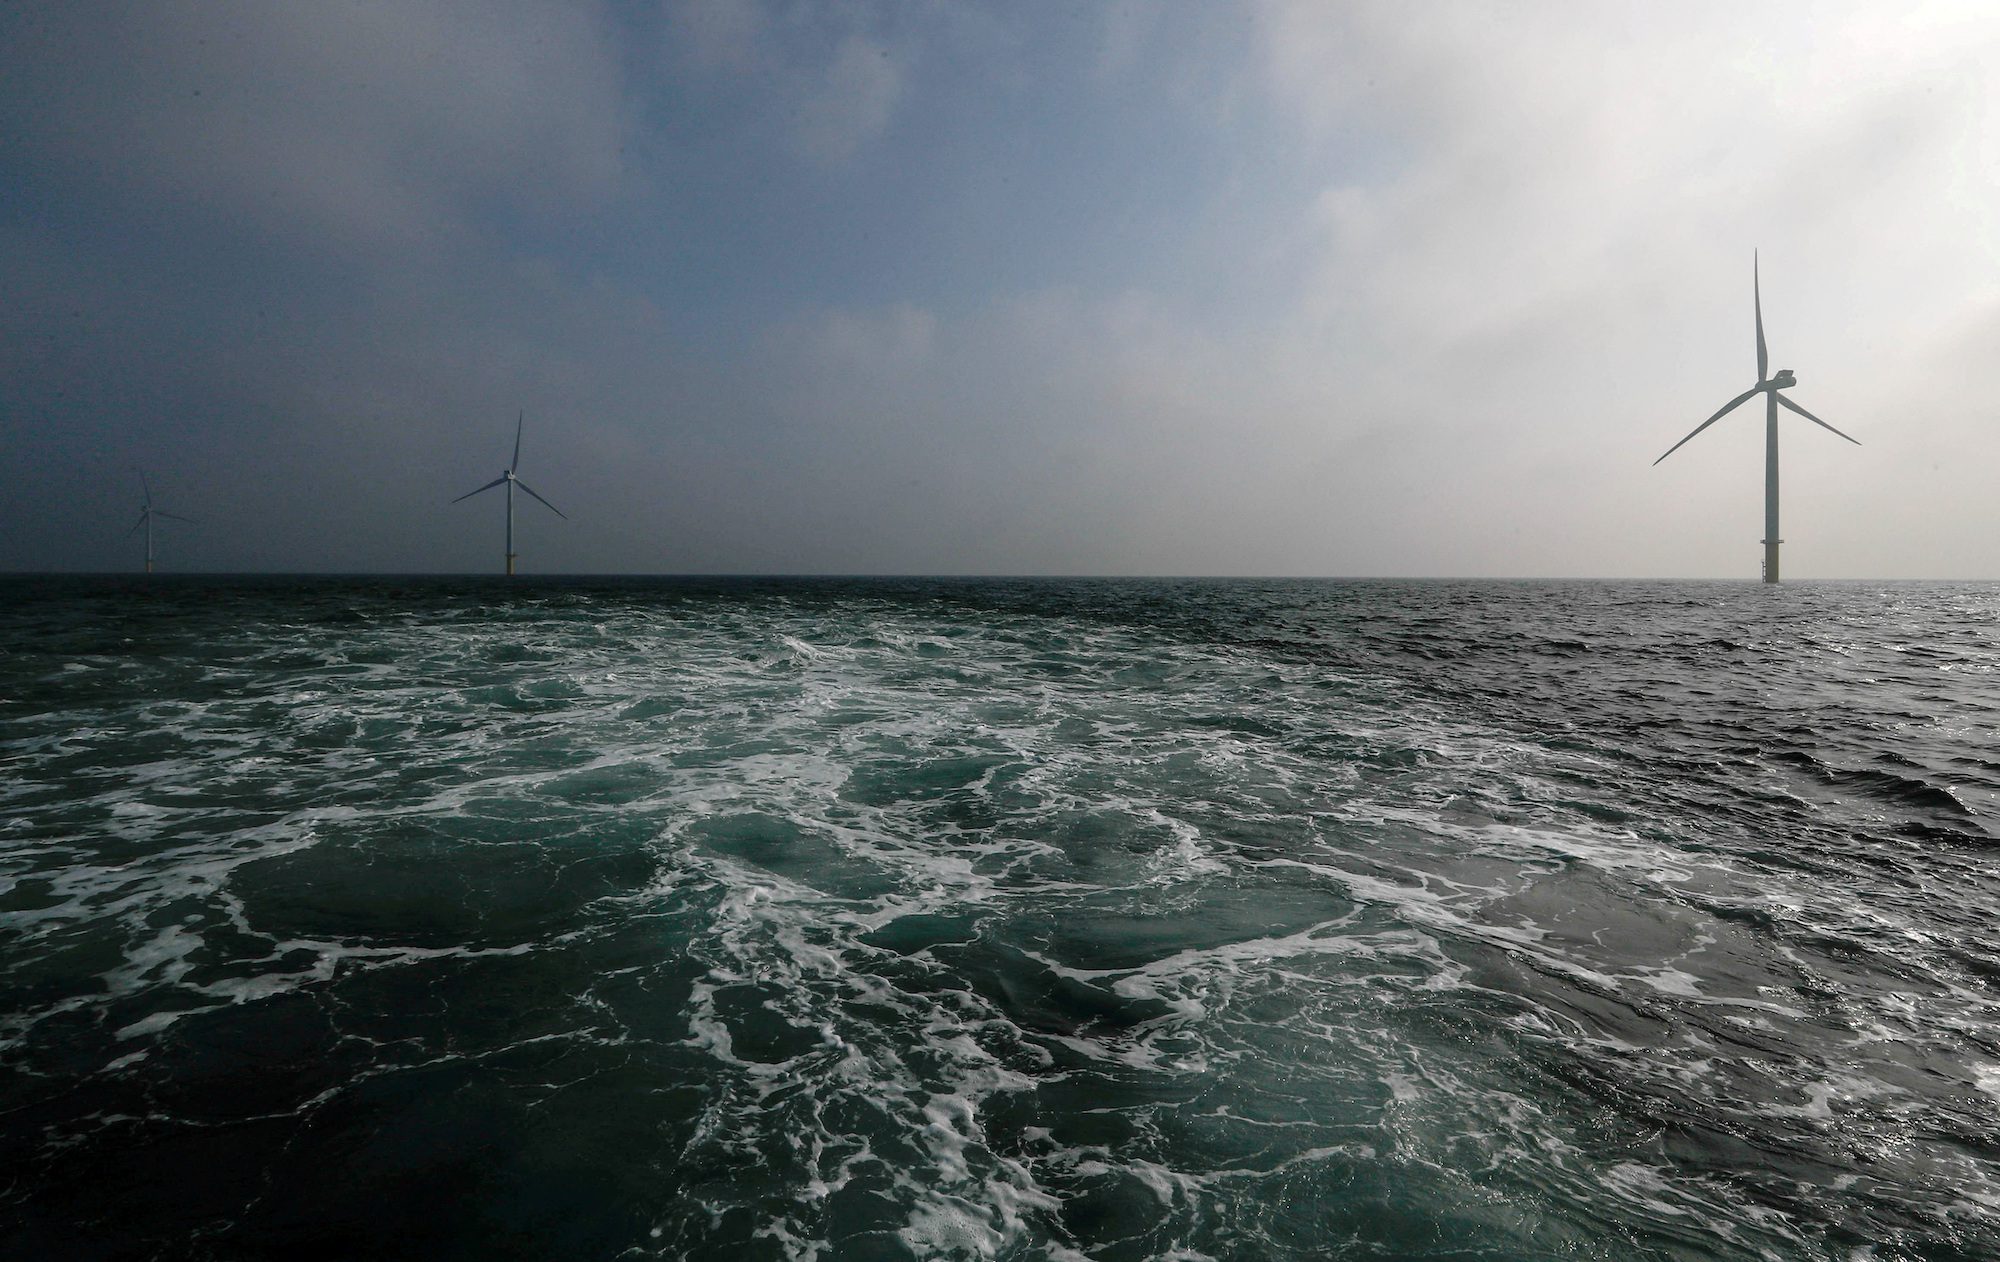 European Countries Look to North Sea as Green Power Engine